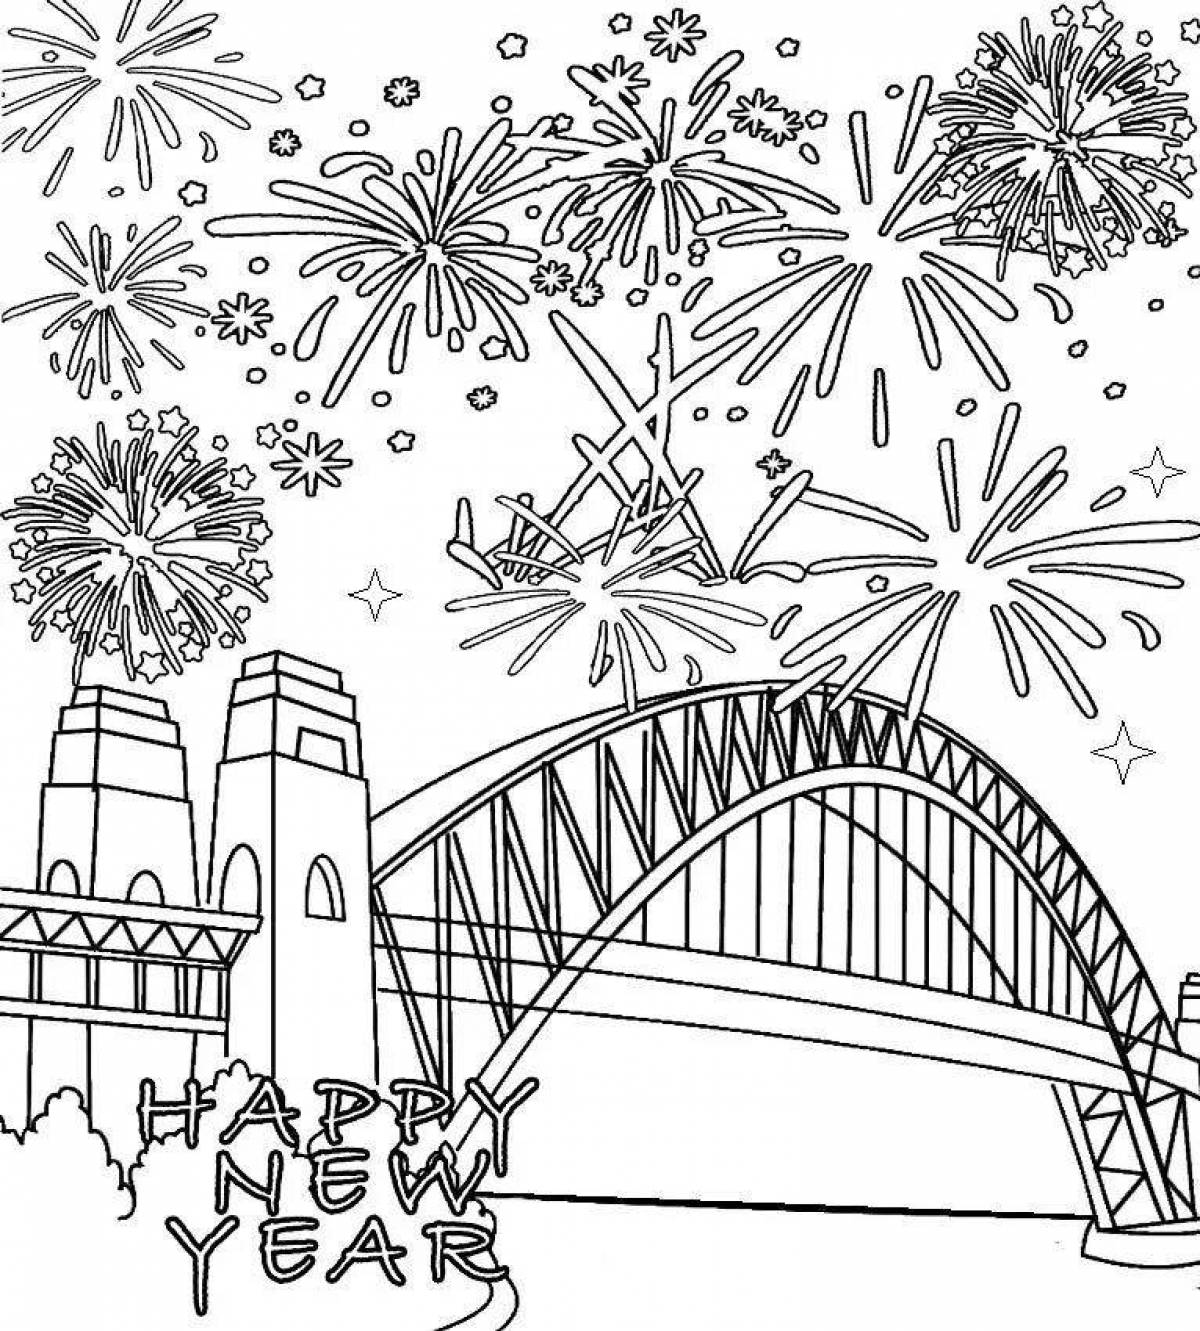 Coloring book glowing fireworks